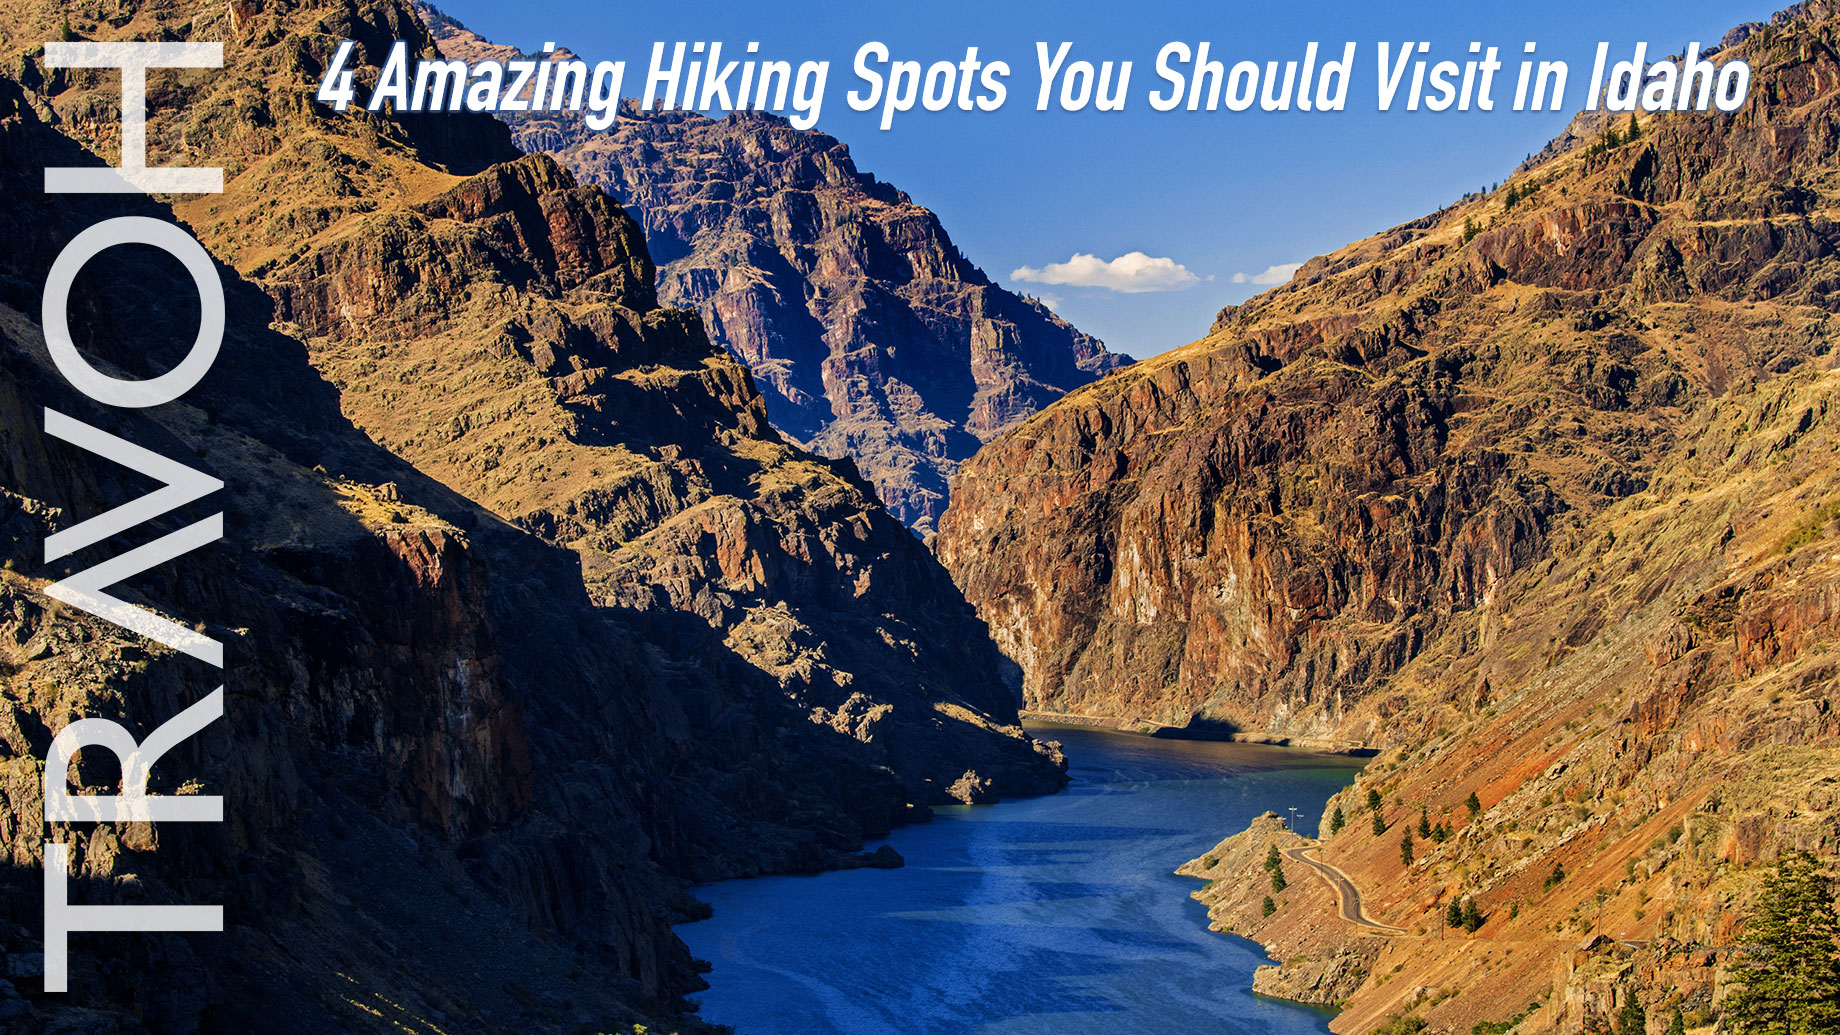 4 Amazing Hiking Spots You Should Visit in Idaho